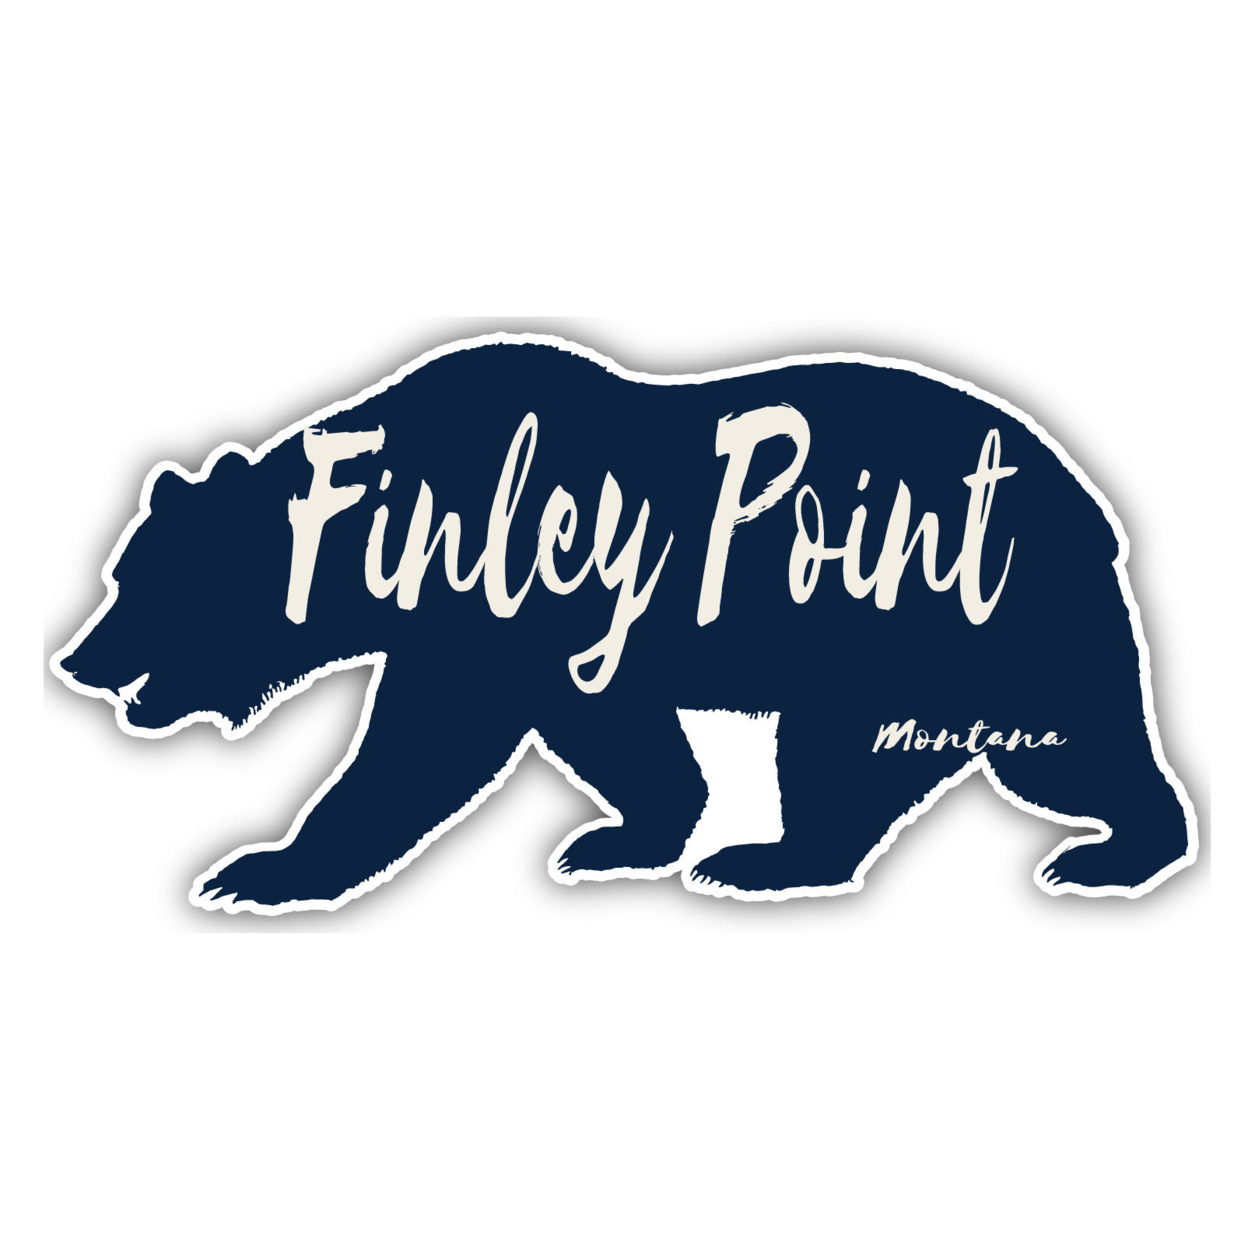 Finley Point Montana Souvenir Decorative Stickers (Choose Theme And Size) - 4-Pack, 2-Inch, Bear